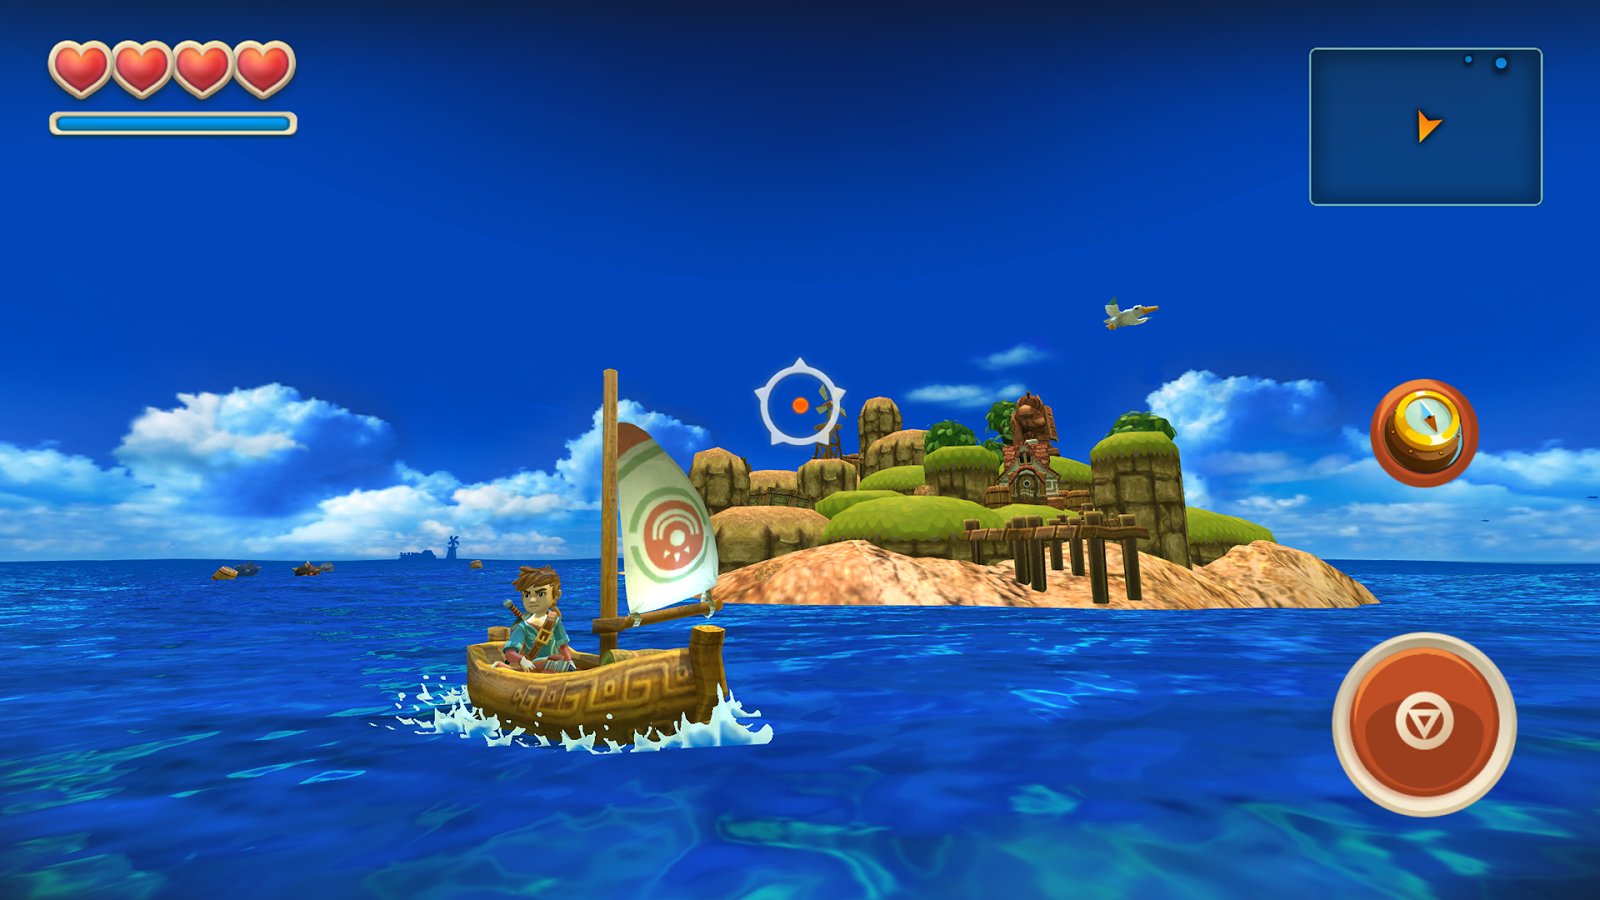 oceanhorn 2 never came out for android